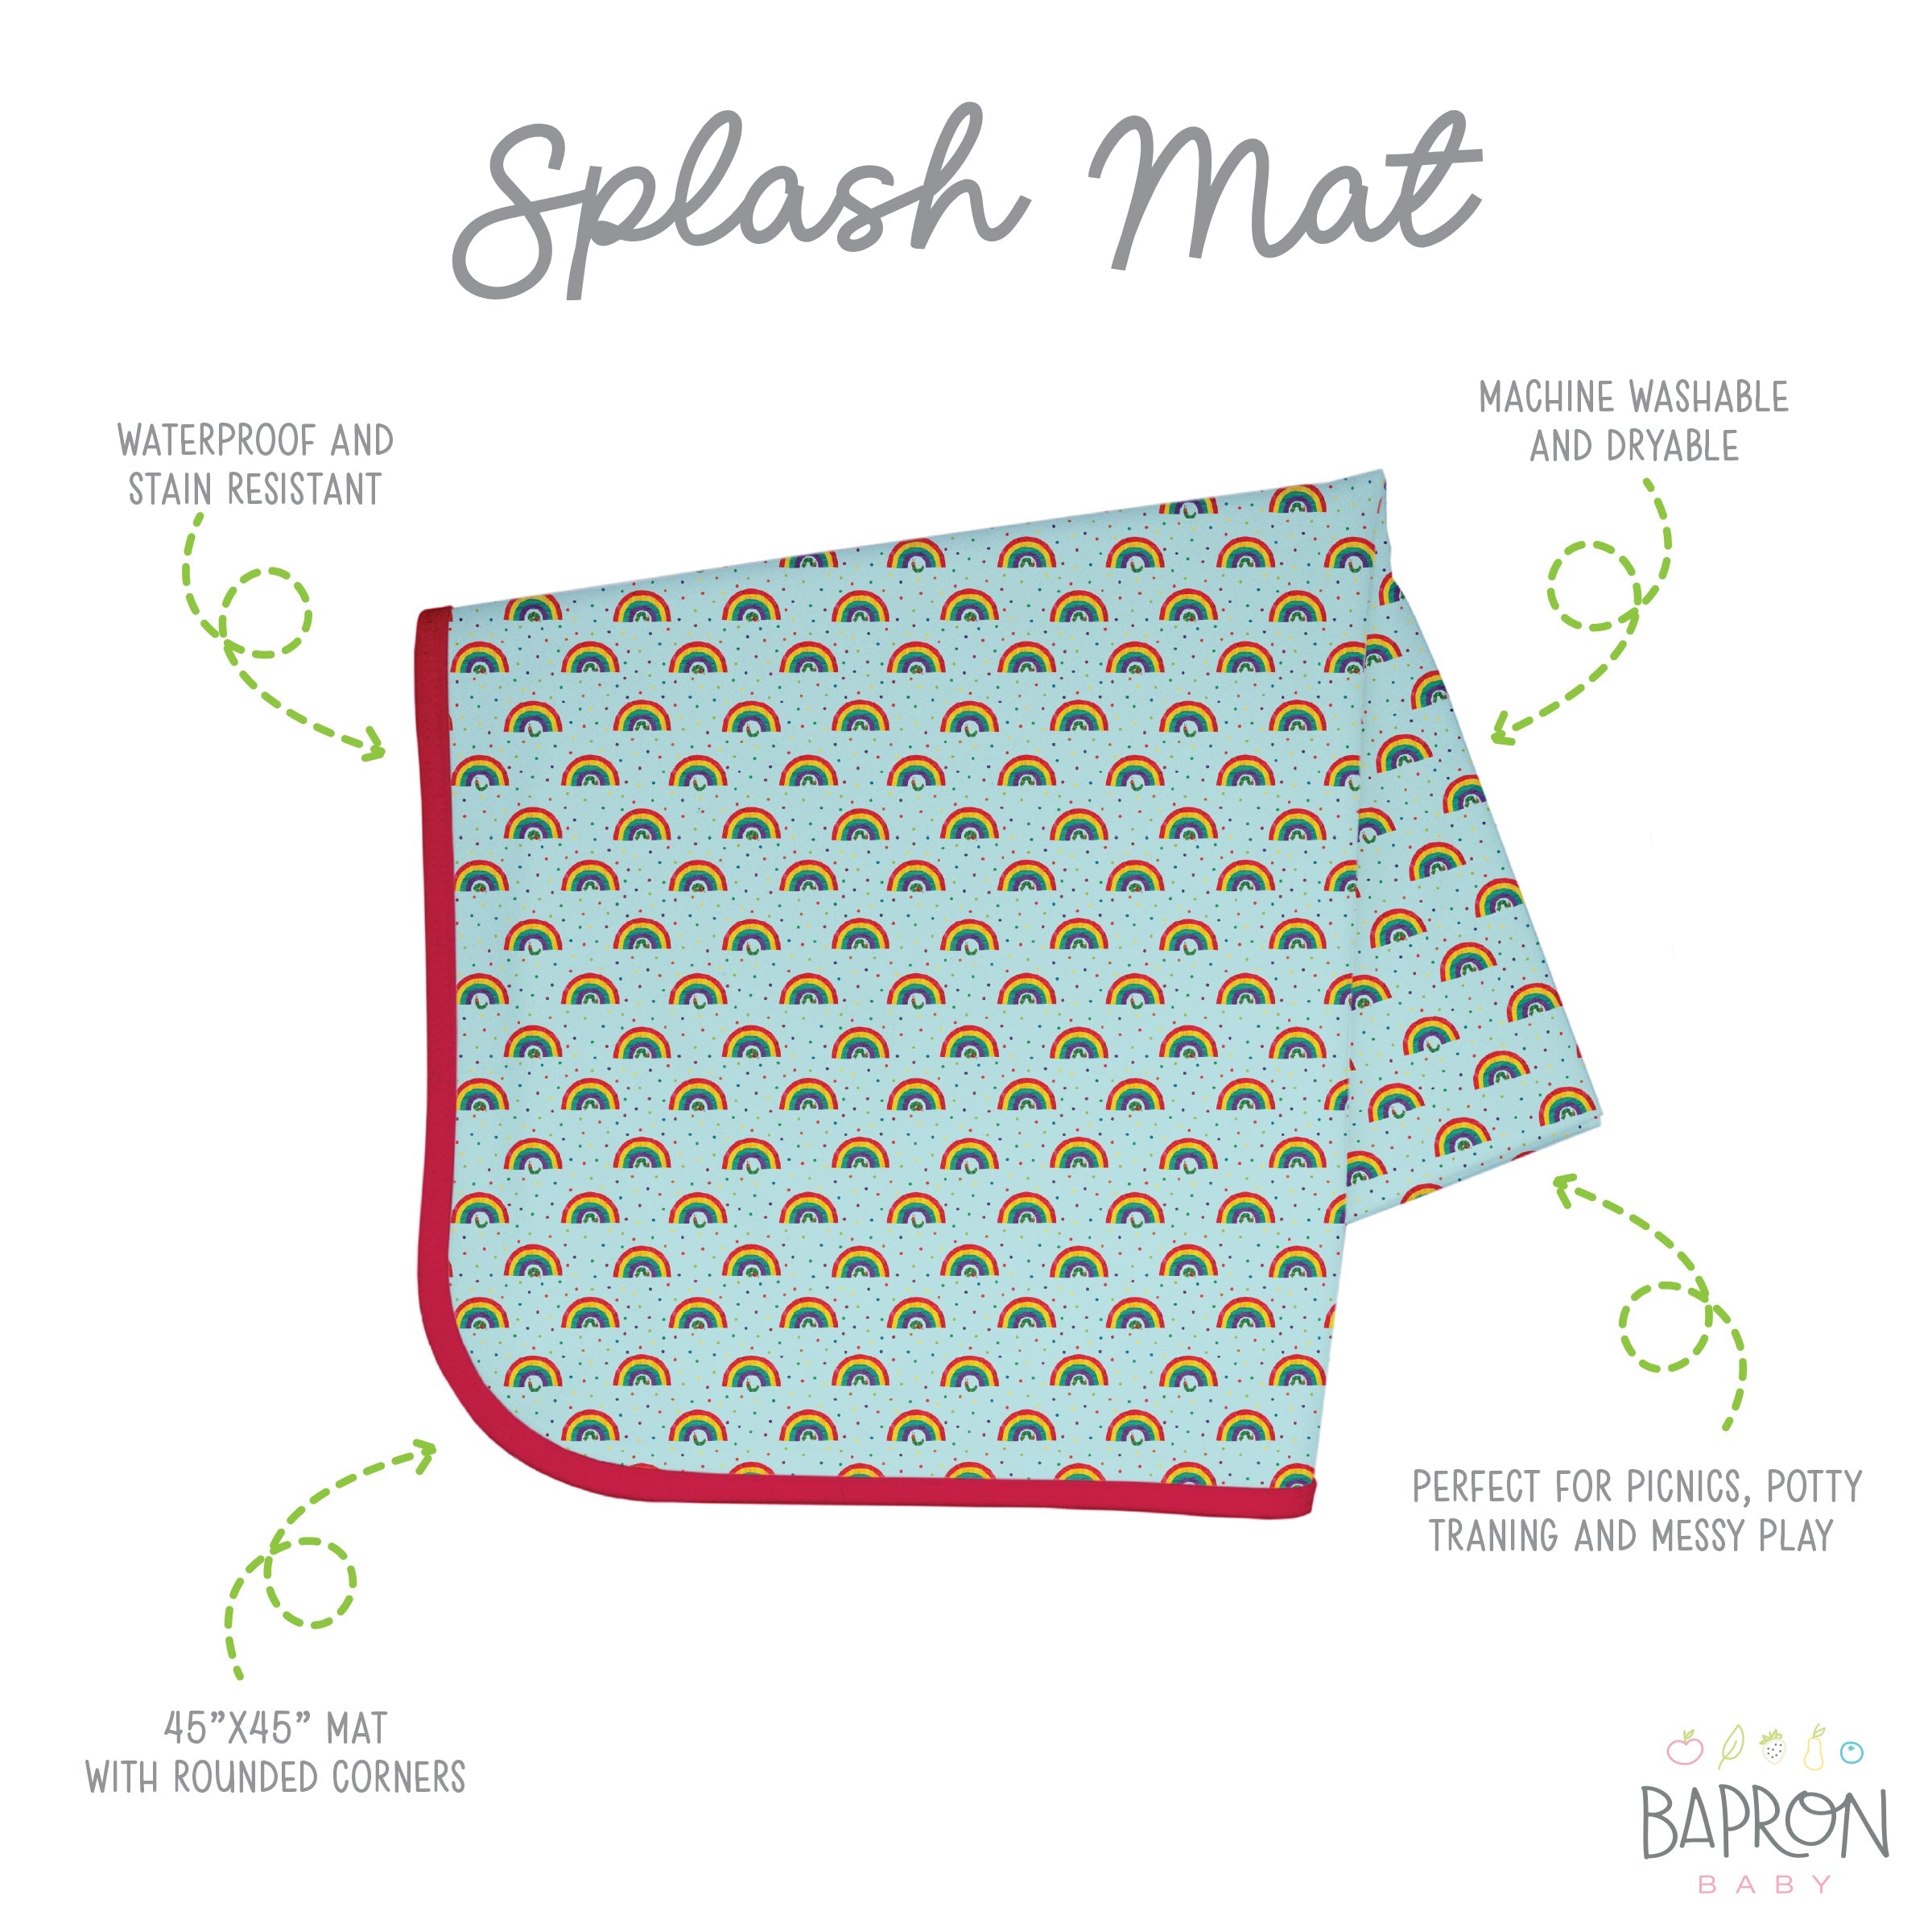 Rainbow Caterpillar Splash Mat - From The World Of Eric Carle - A Waterproof Catch-all For Highchair Spills And More!